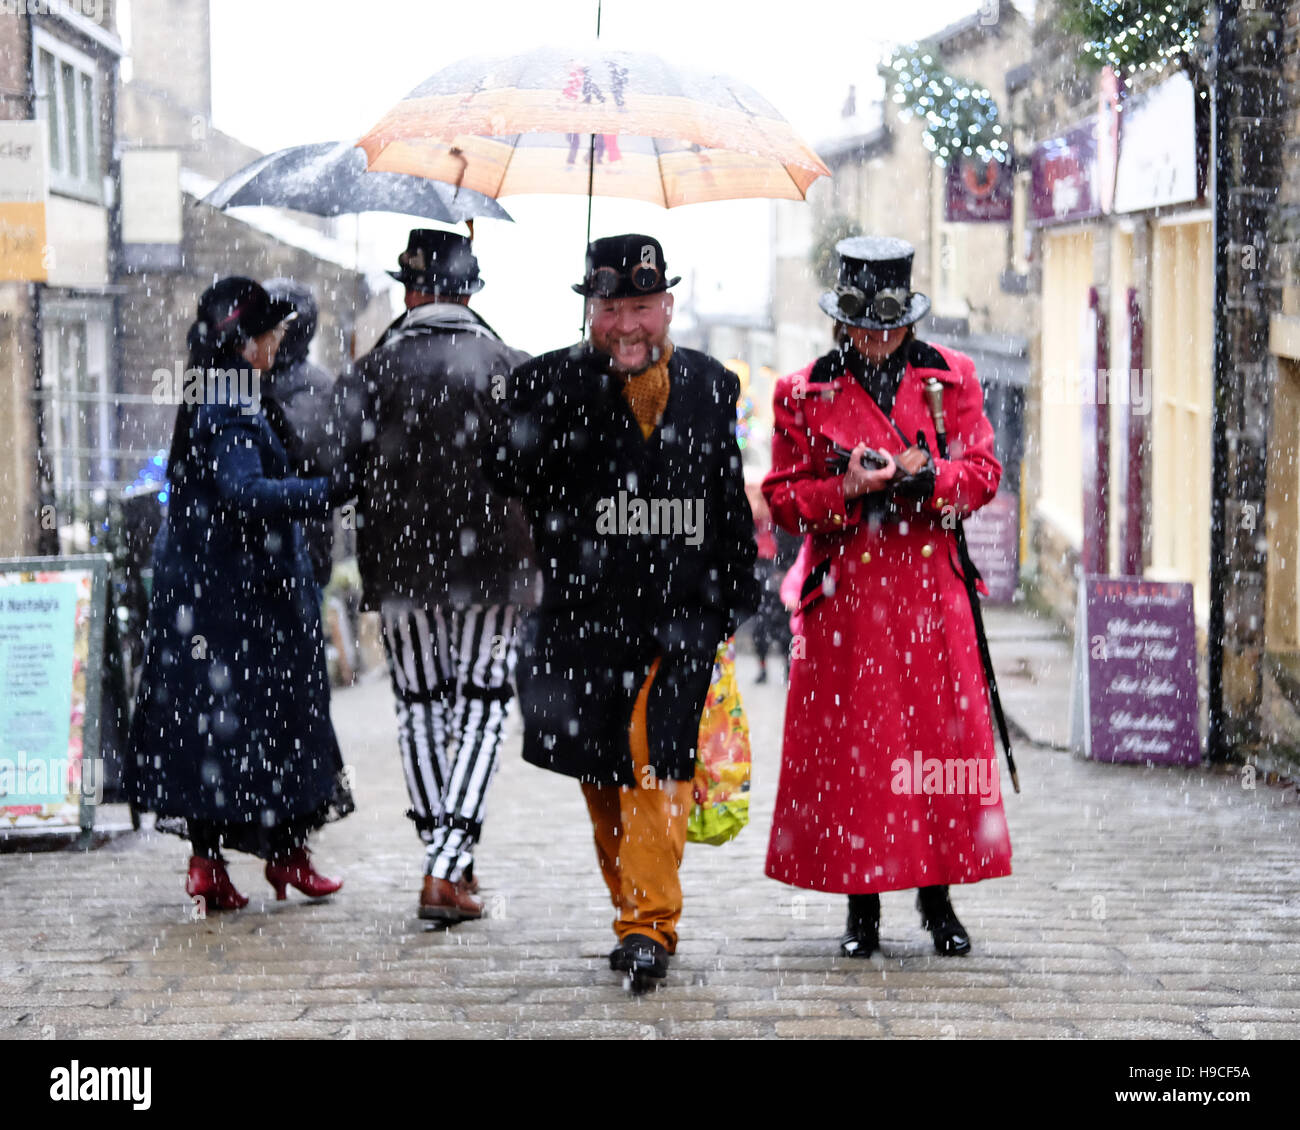 A group of people in steampunk clothing on a cobbled street in the snow with umbrellas. Stock Photo